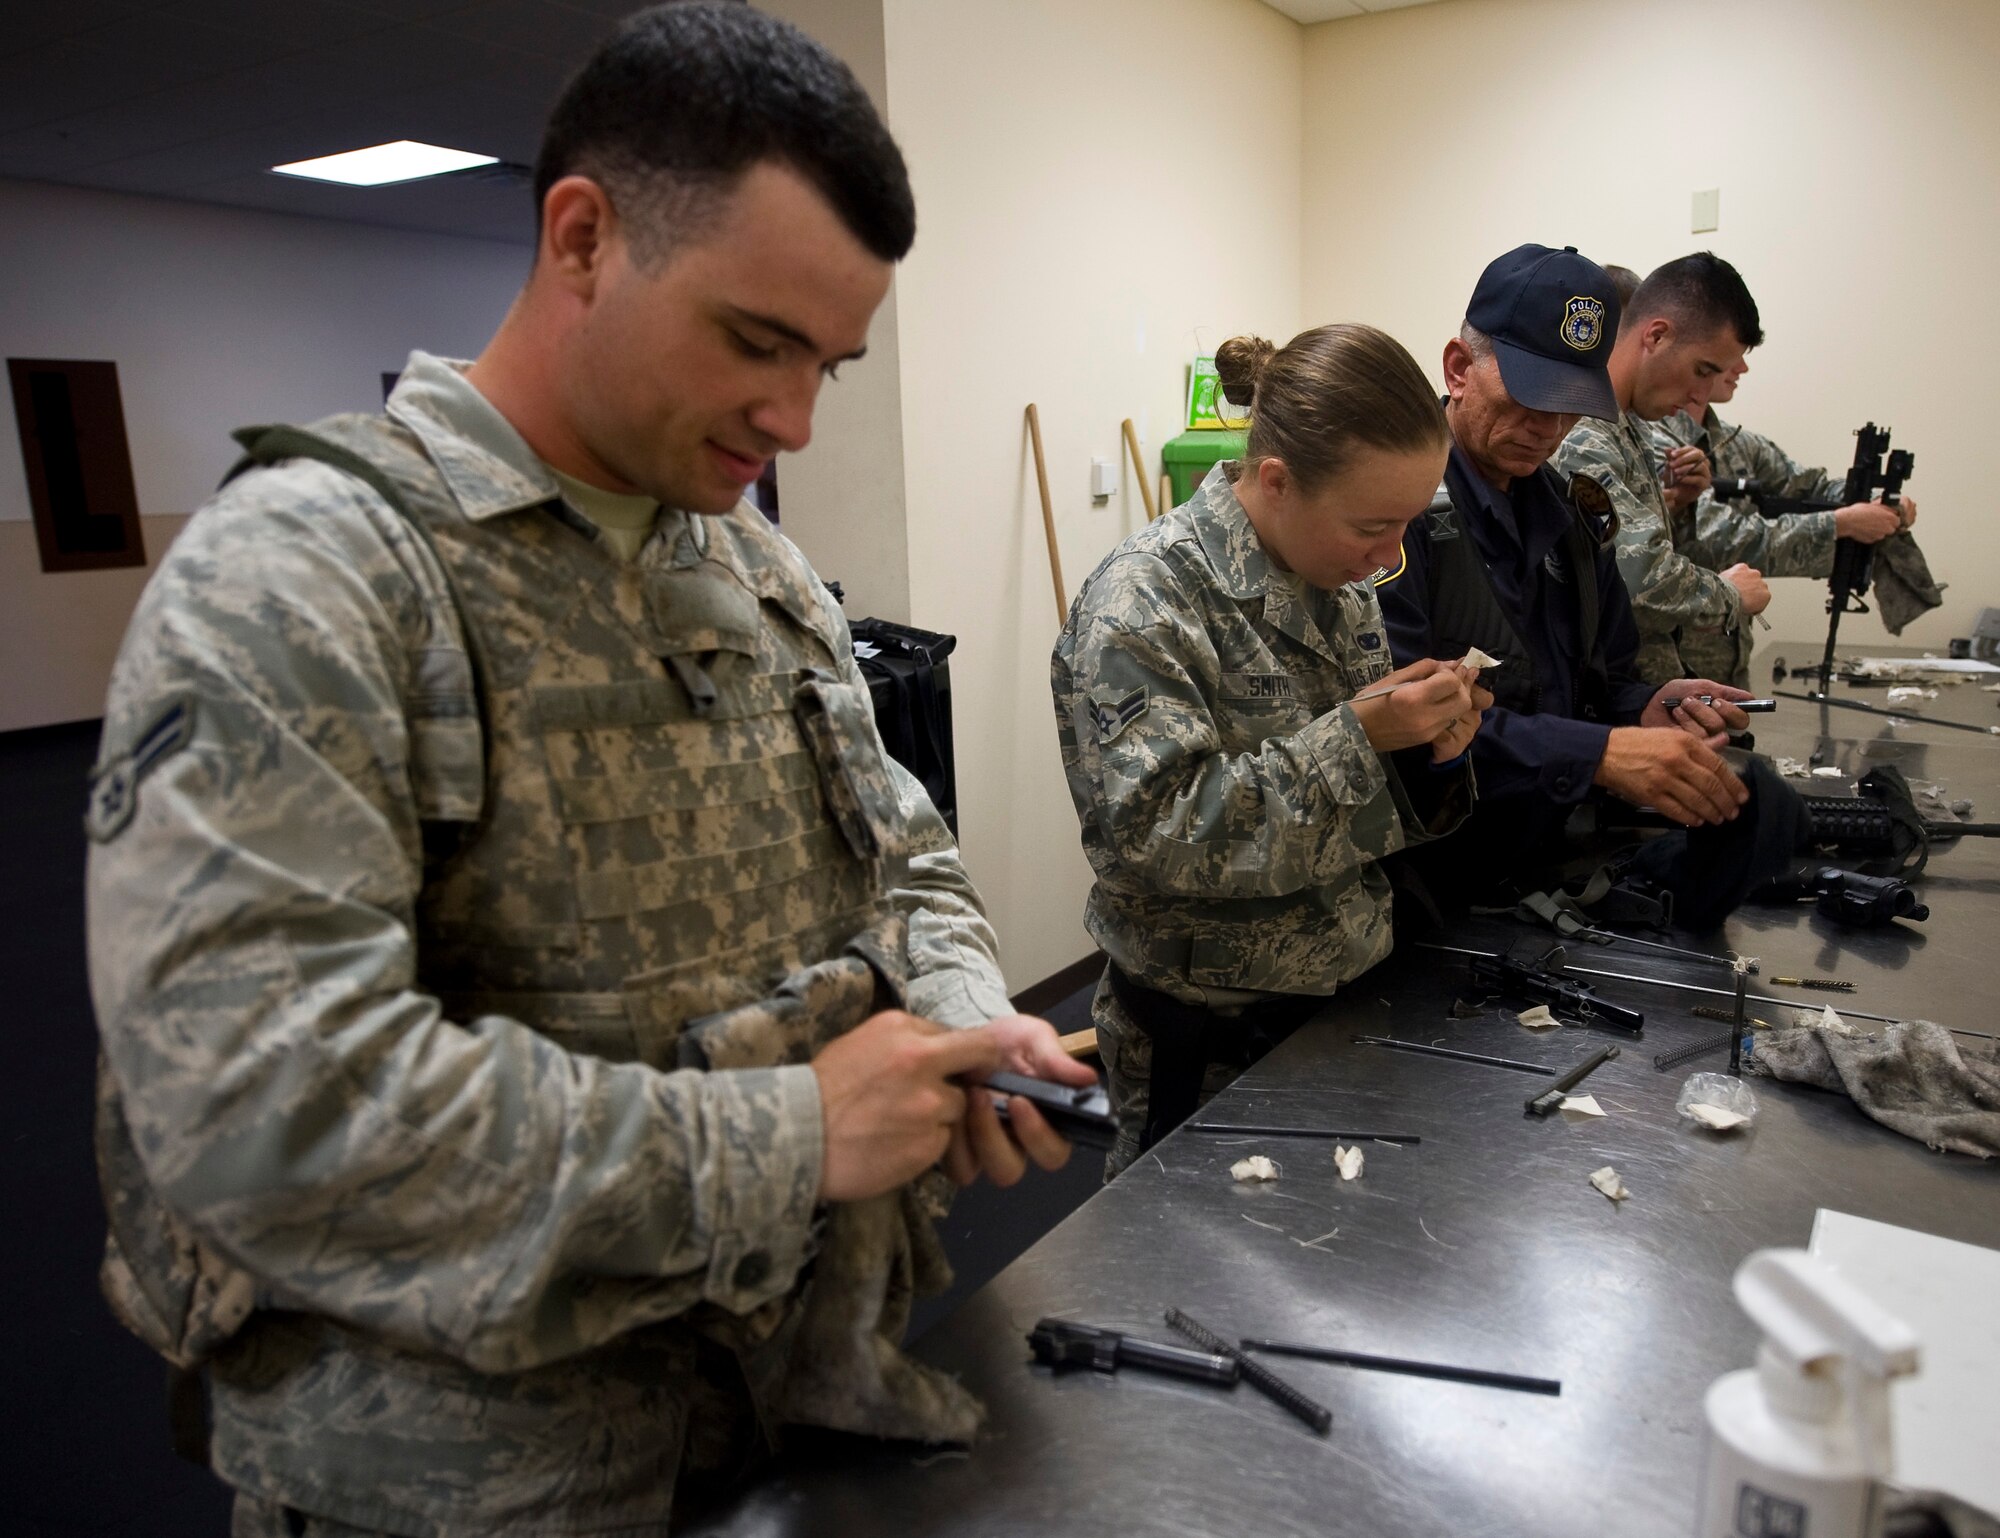 Personnel from the 2nd Security Forces Squadron clean their weapons in the 2 SFS guard mount room on Barksdale Air Force Base, La., July 31. If their weapons are due for cleaning, they must pass an inspection by the armorers before the Airman is allowed to return the weapon. (U.S. Air Force photo/Staff Sgt. Chad Warren)(RELEASED)